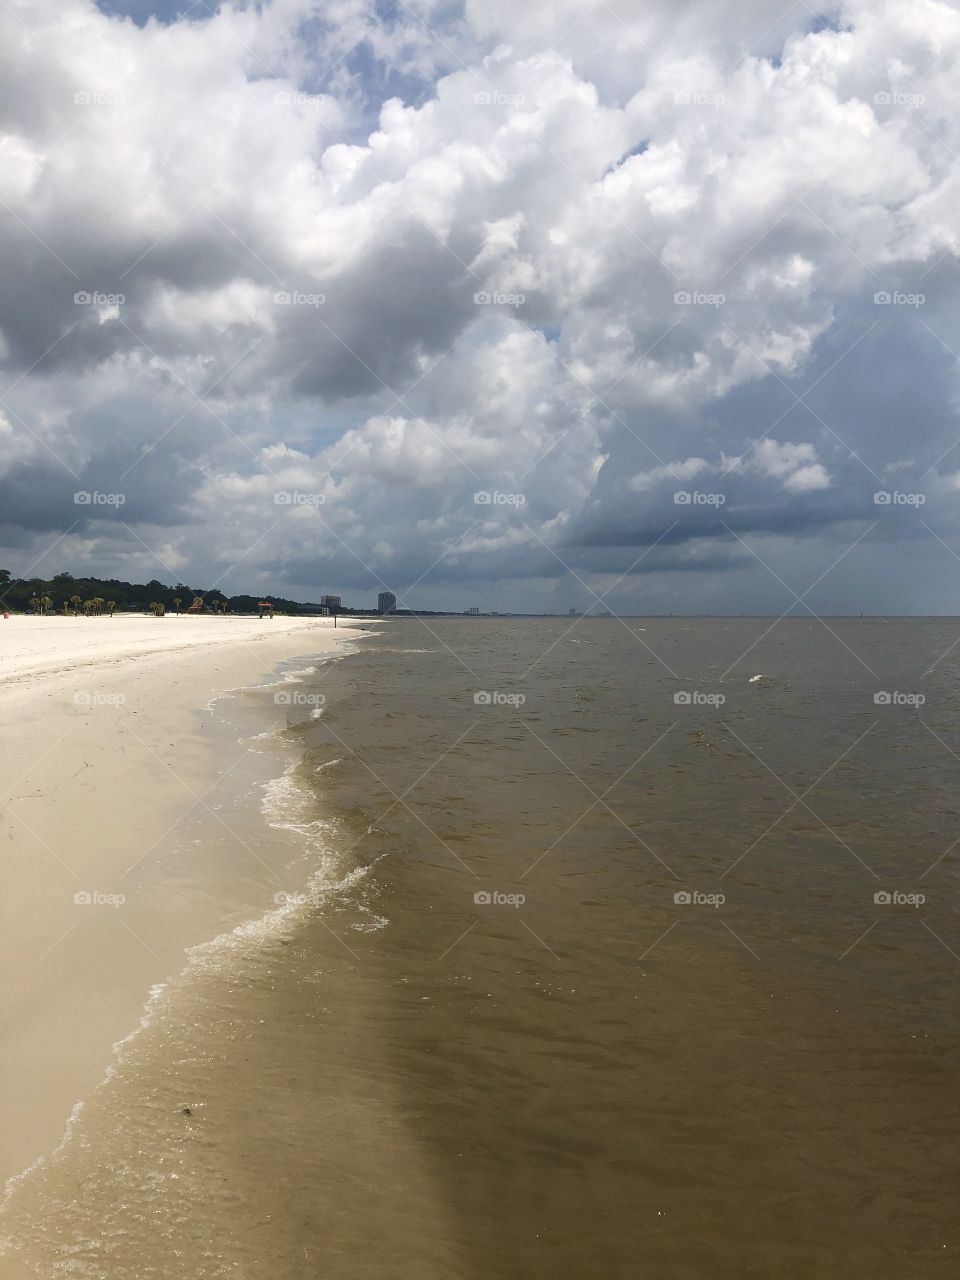 The Gulf waters and beach with stormy sky in Mississippi. 